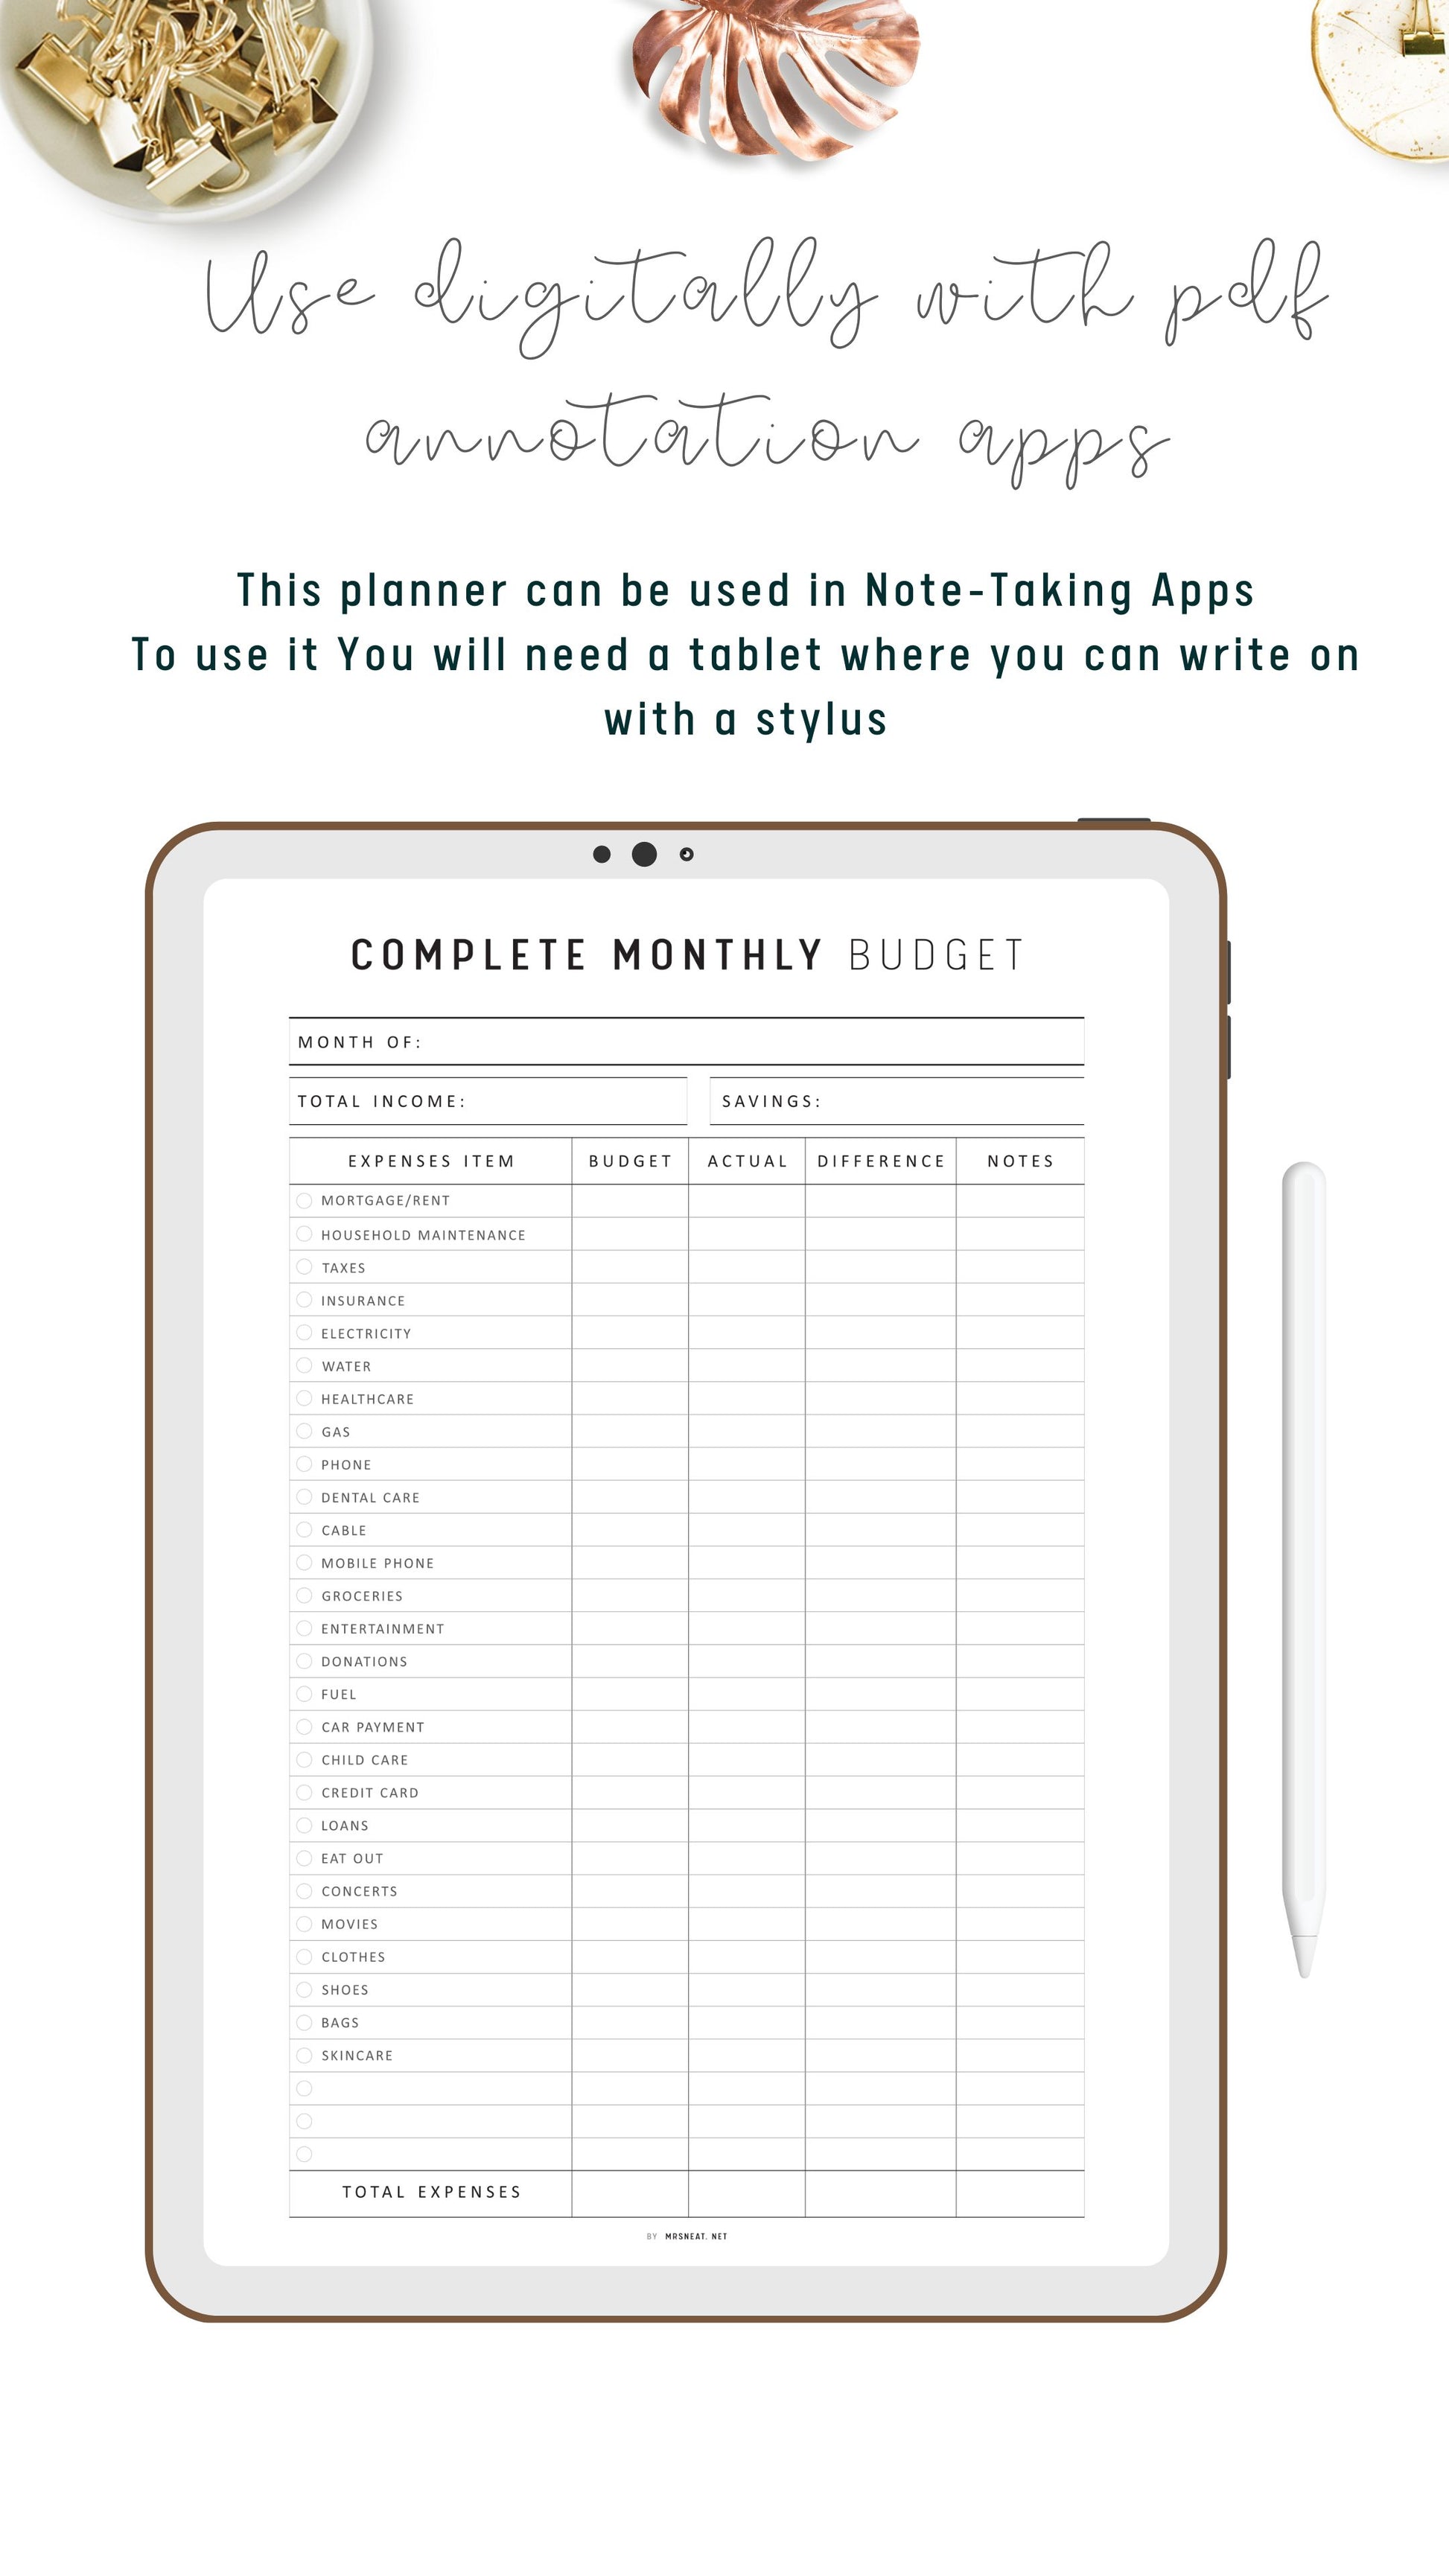 Complete Monthly Budget Template Printable, The Ultimate Monthly Budget Planner, A4, A5, Letter, Half Letter, Colorful Planner, Digital Planner, 2 color options, 2 versions